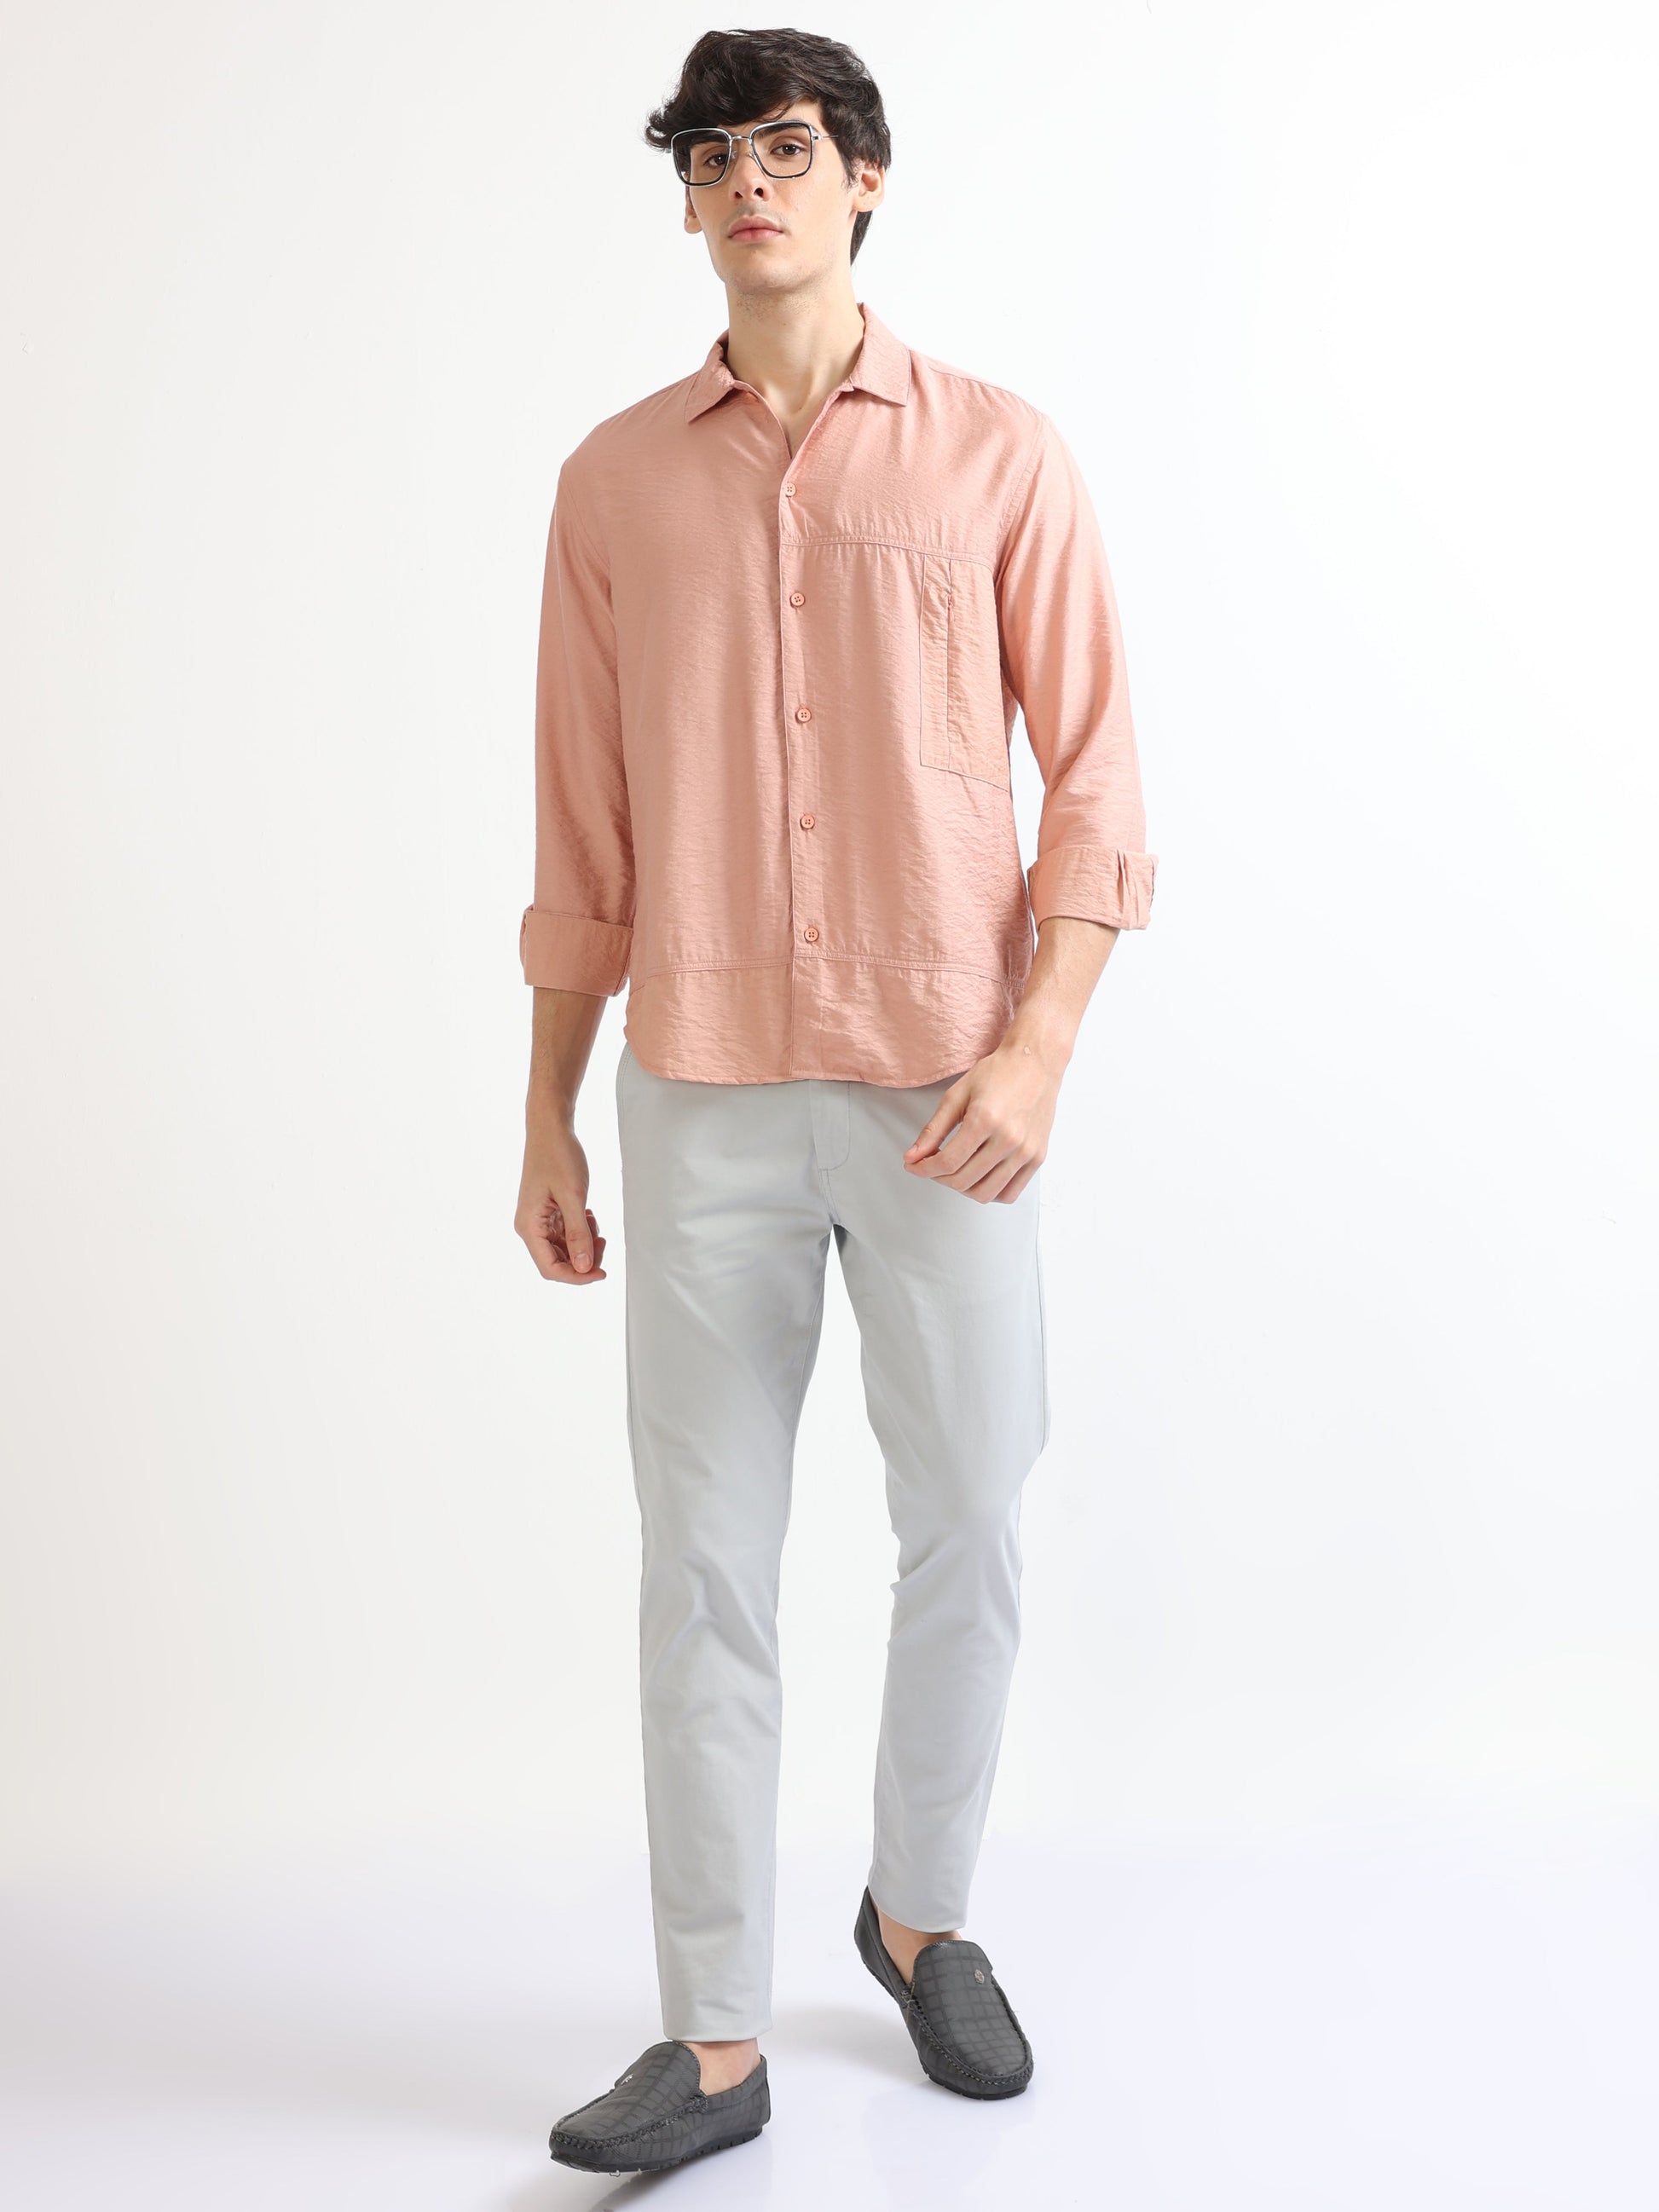 Buy Imported Fabric Solid Crushed Shirt Online.